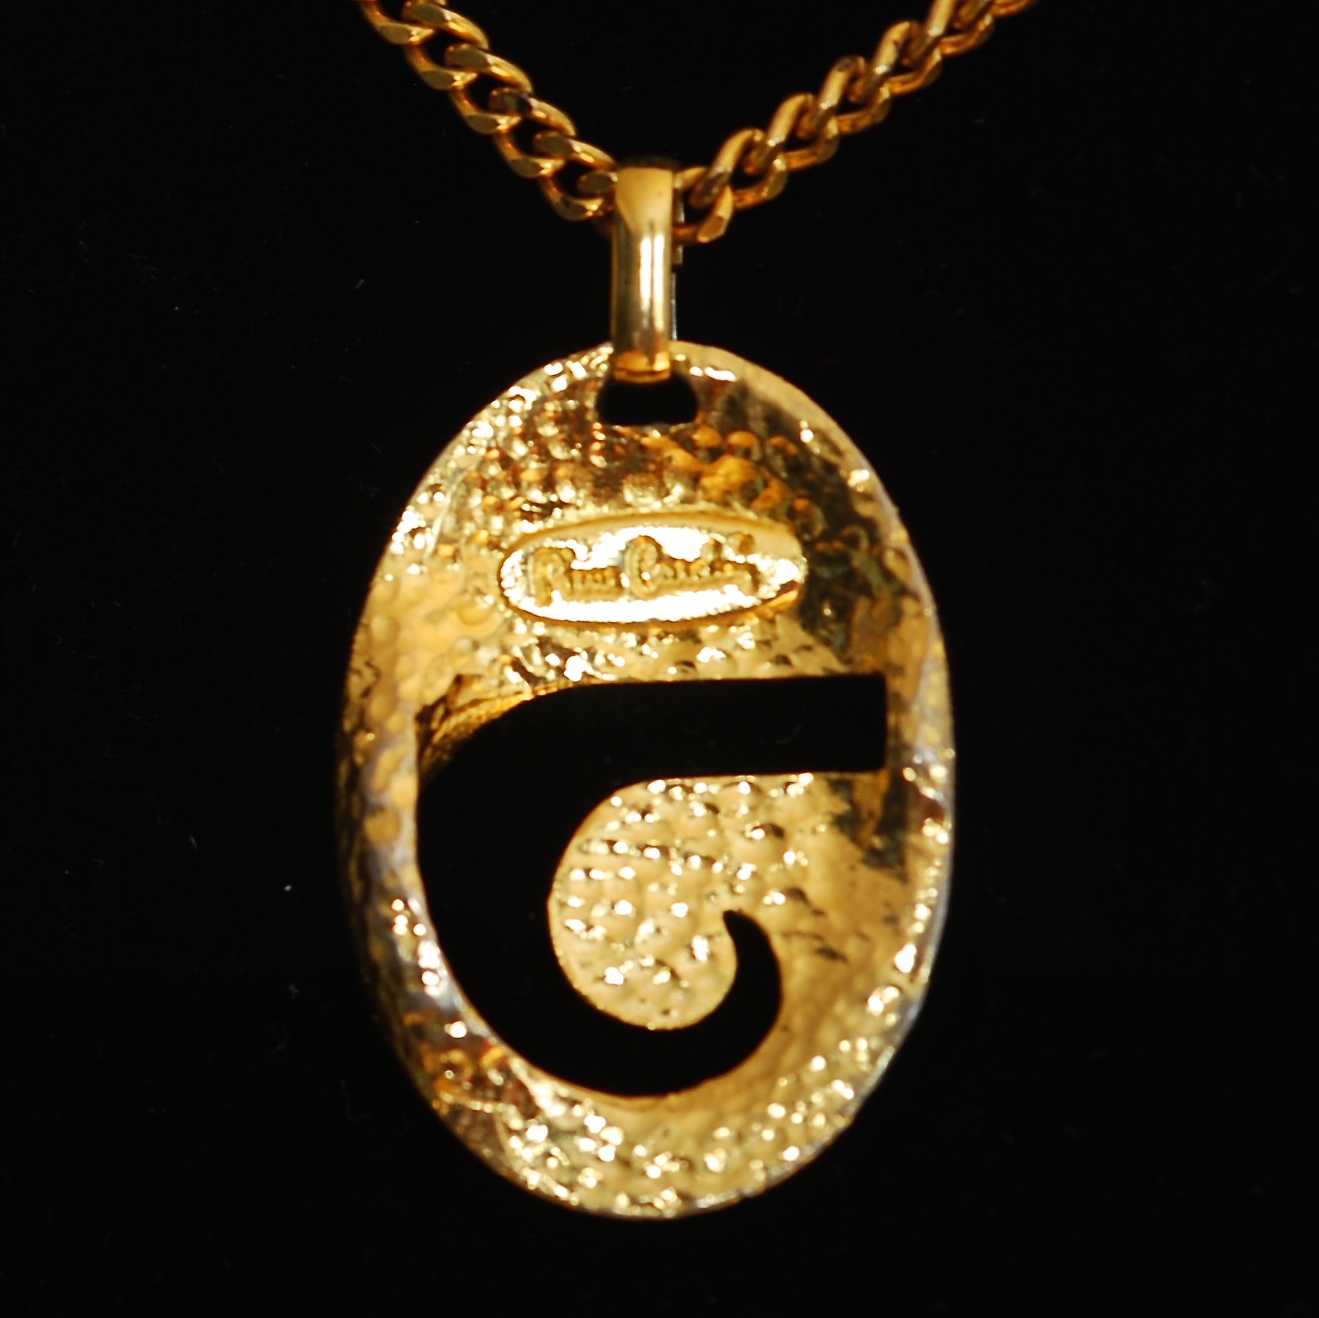 Pierre Cardin Vintage Gold Tone Logo Pendant On A Hobe Chain – Signed ...